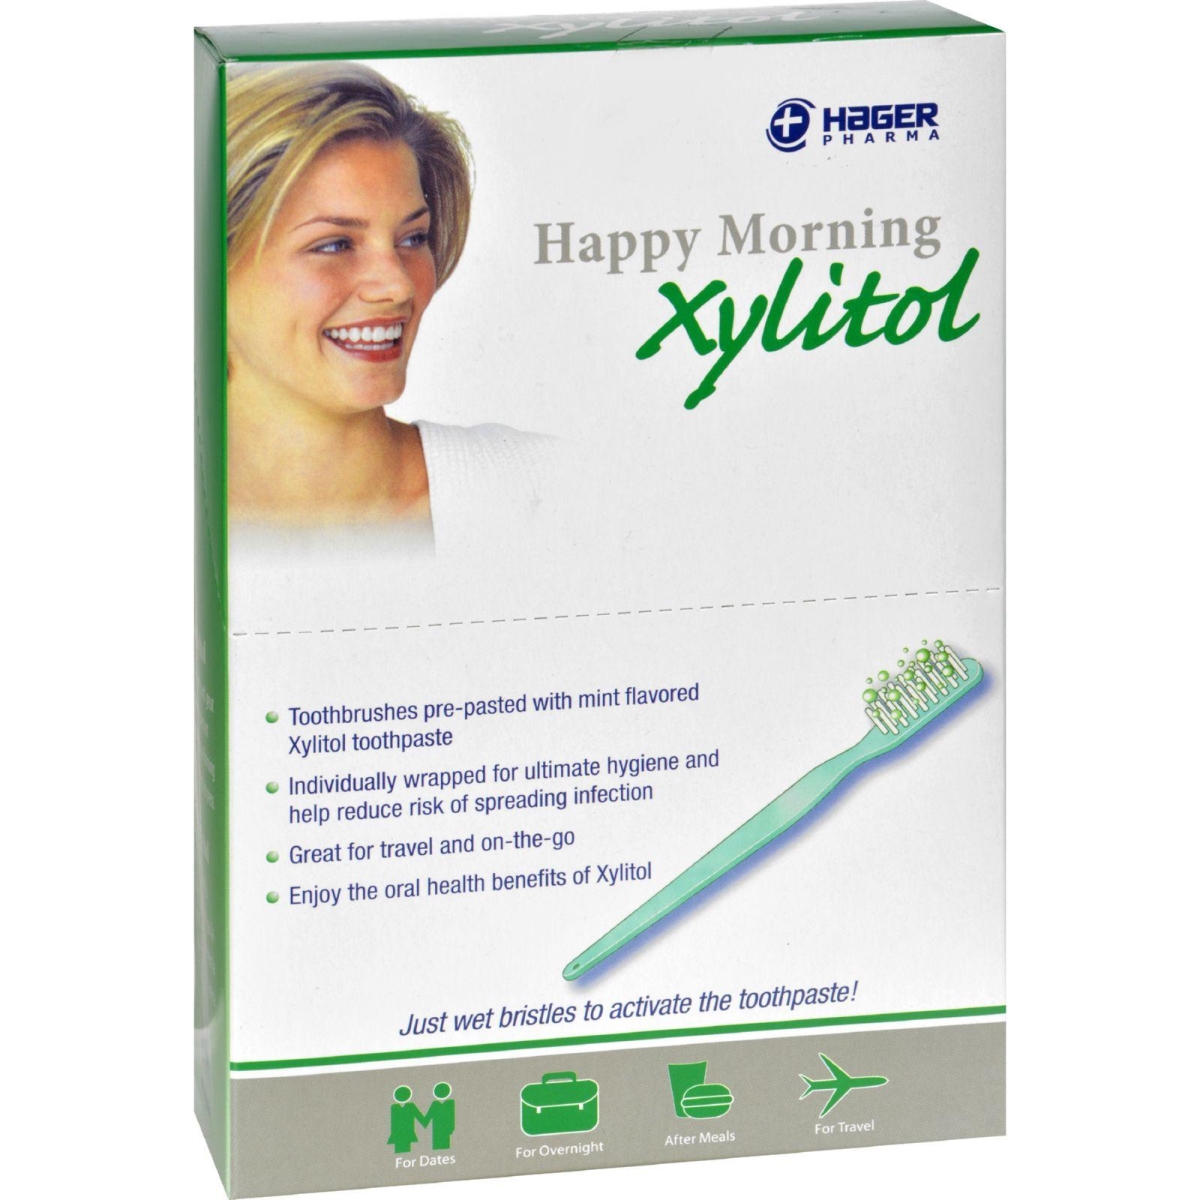 Hg1540947 Toothbrush With Xylitol - Happy Morning